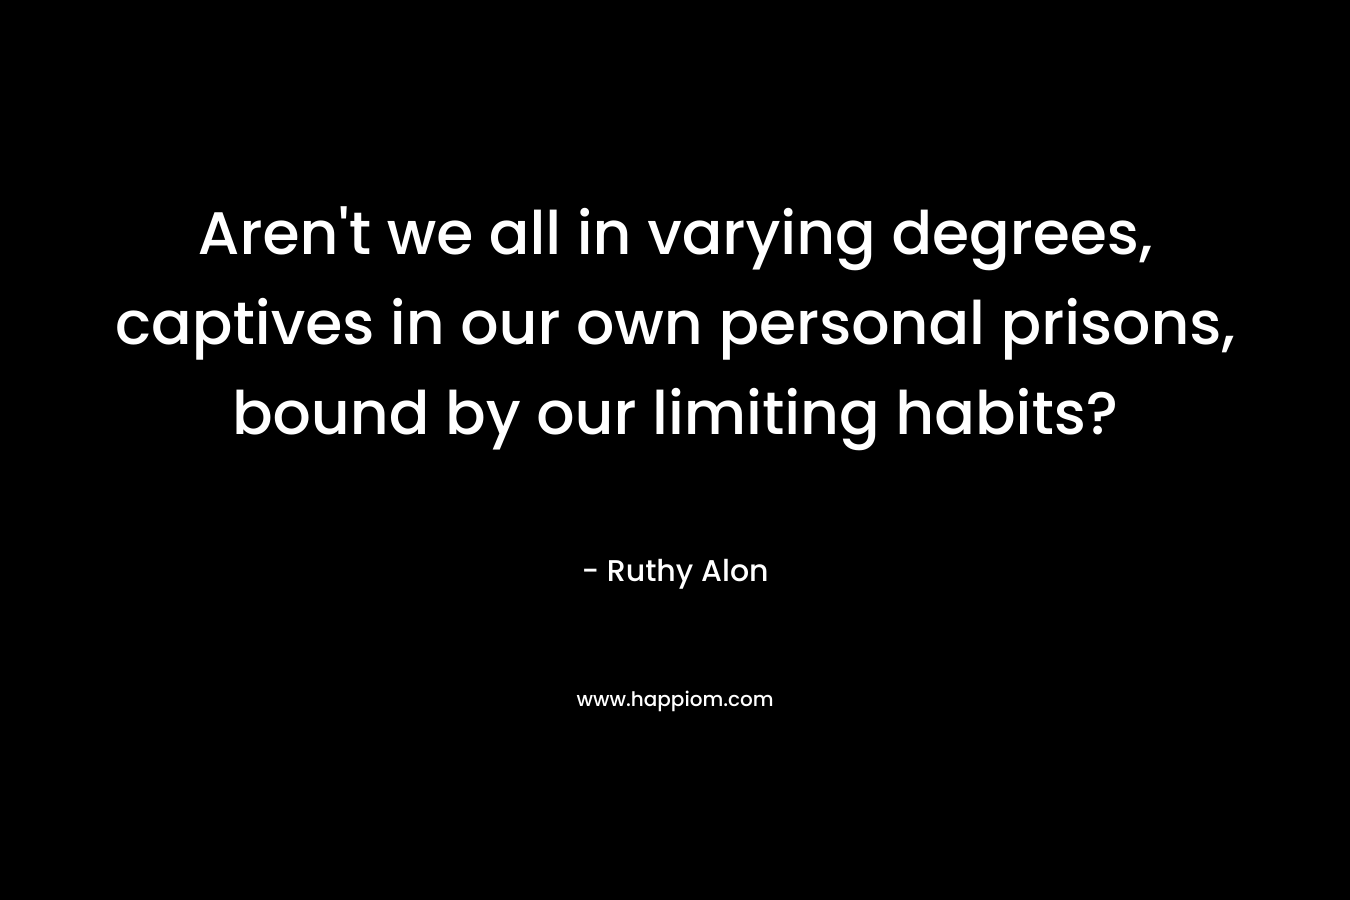 Aren’t we all in varying degrees, captives in our own personal prisons, bound by our limiting habits? – Ruthy Alon